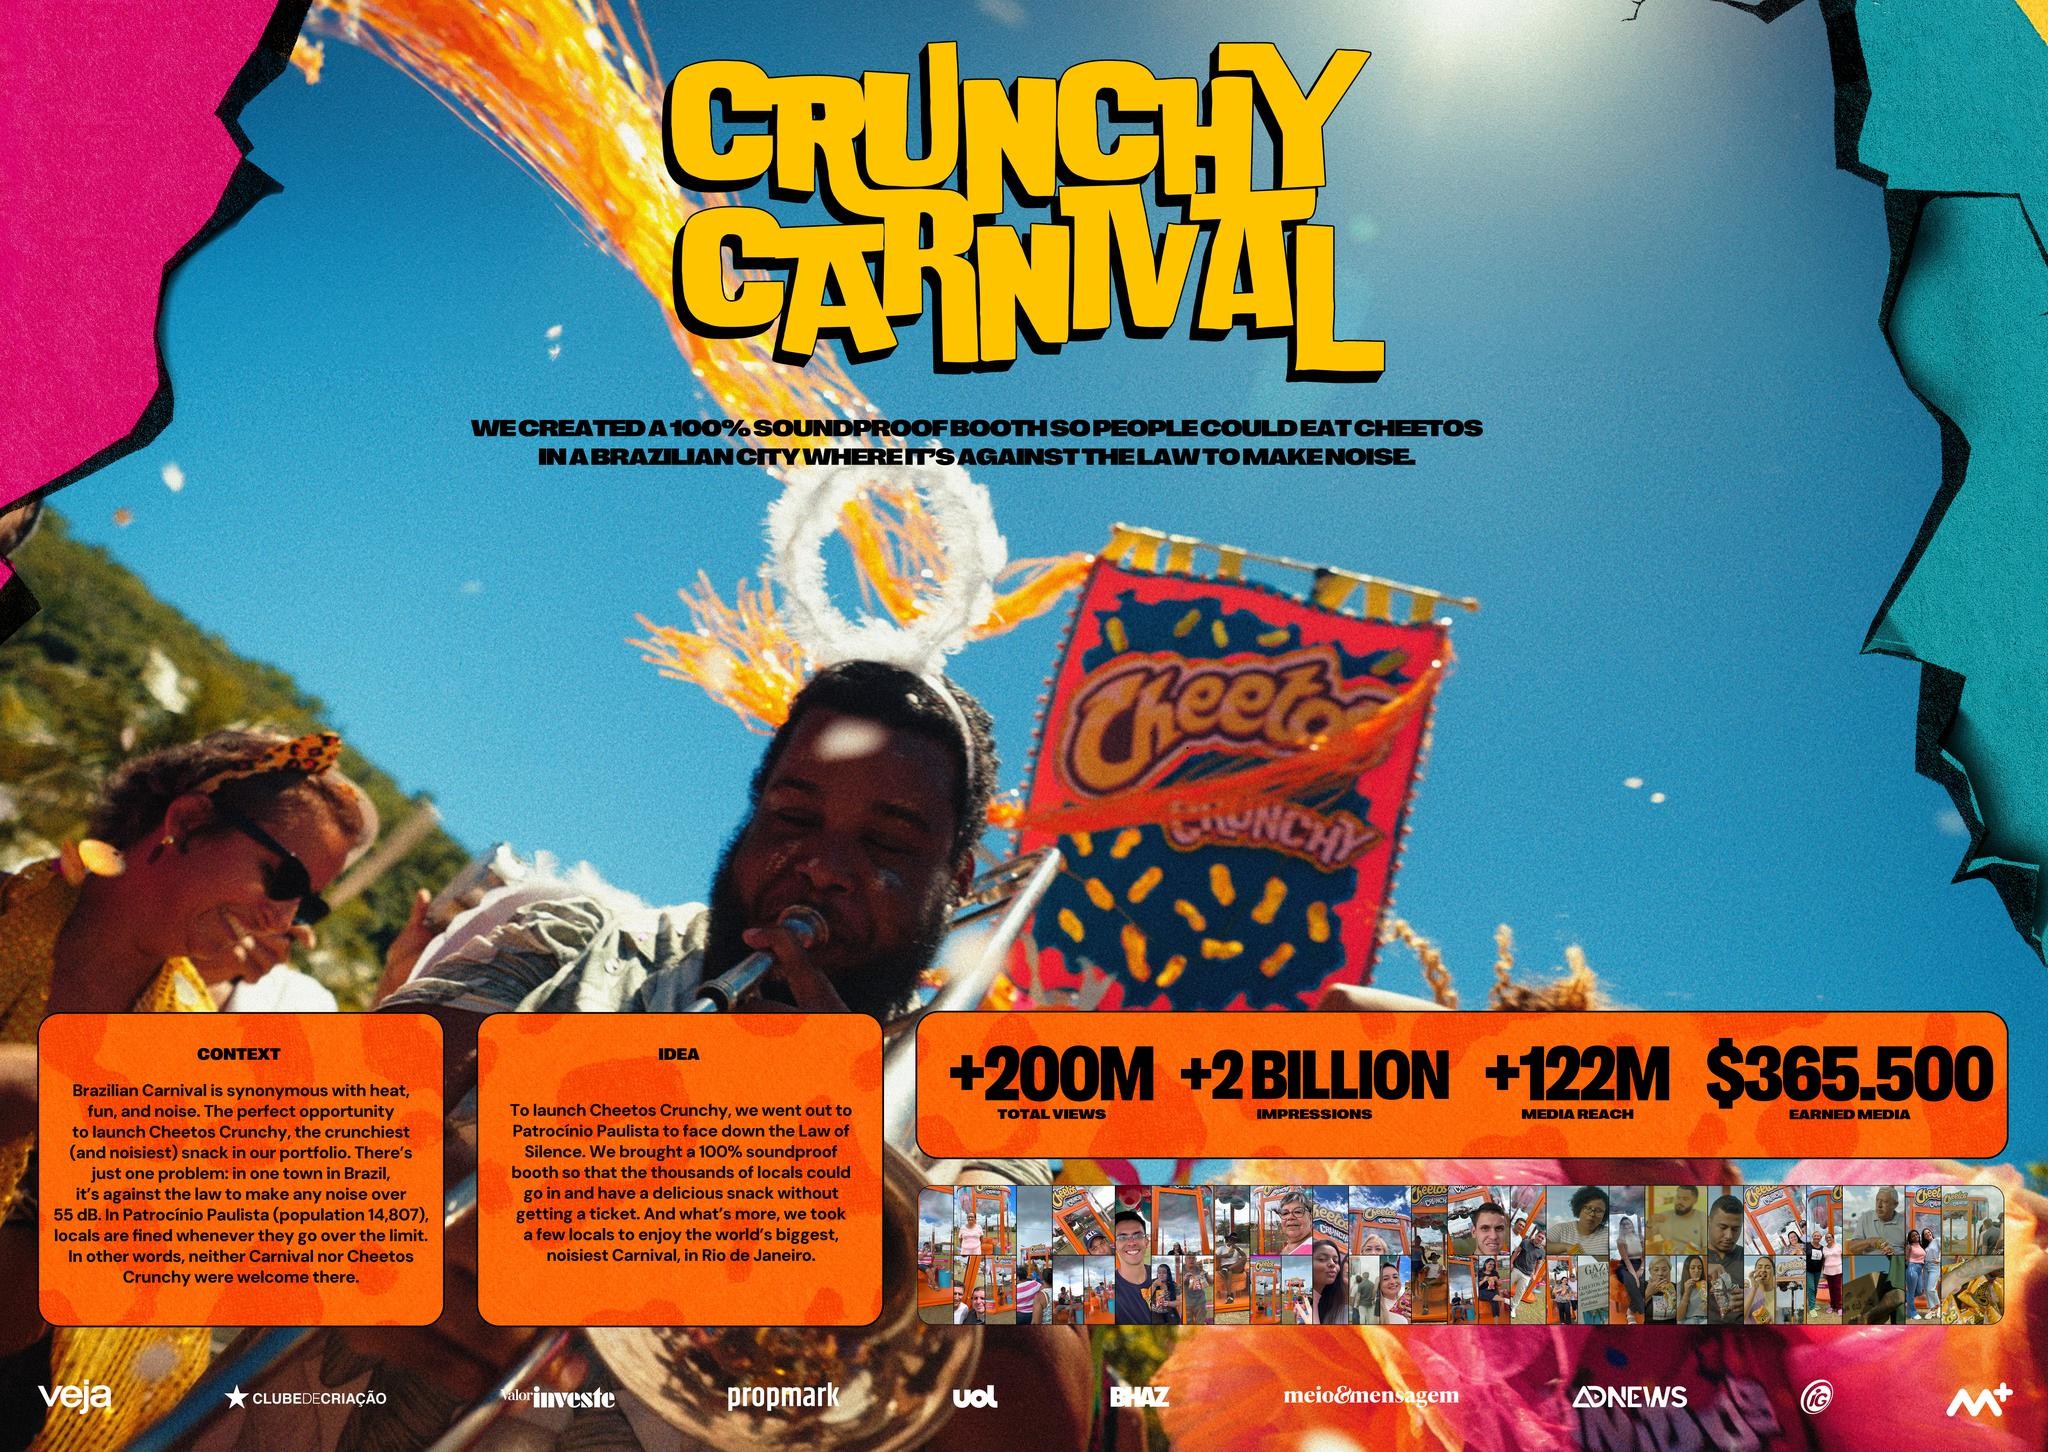 The Crunchy Carnival